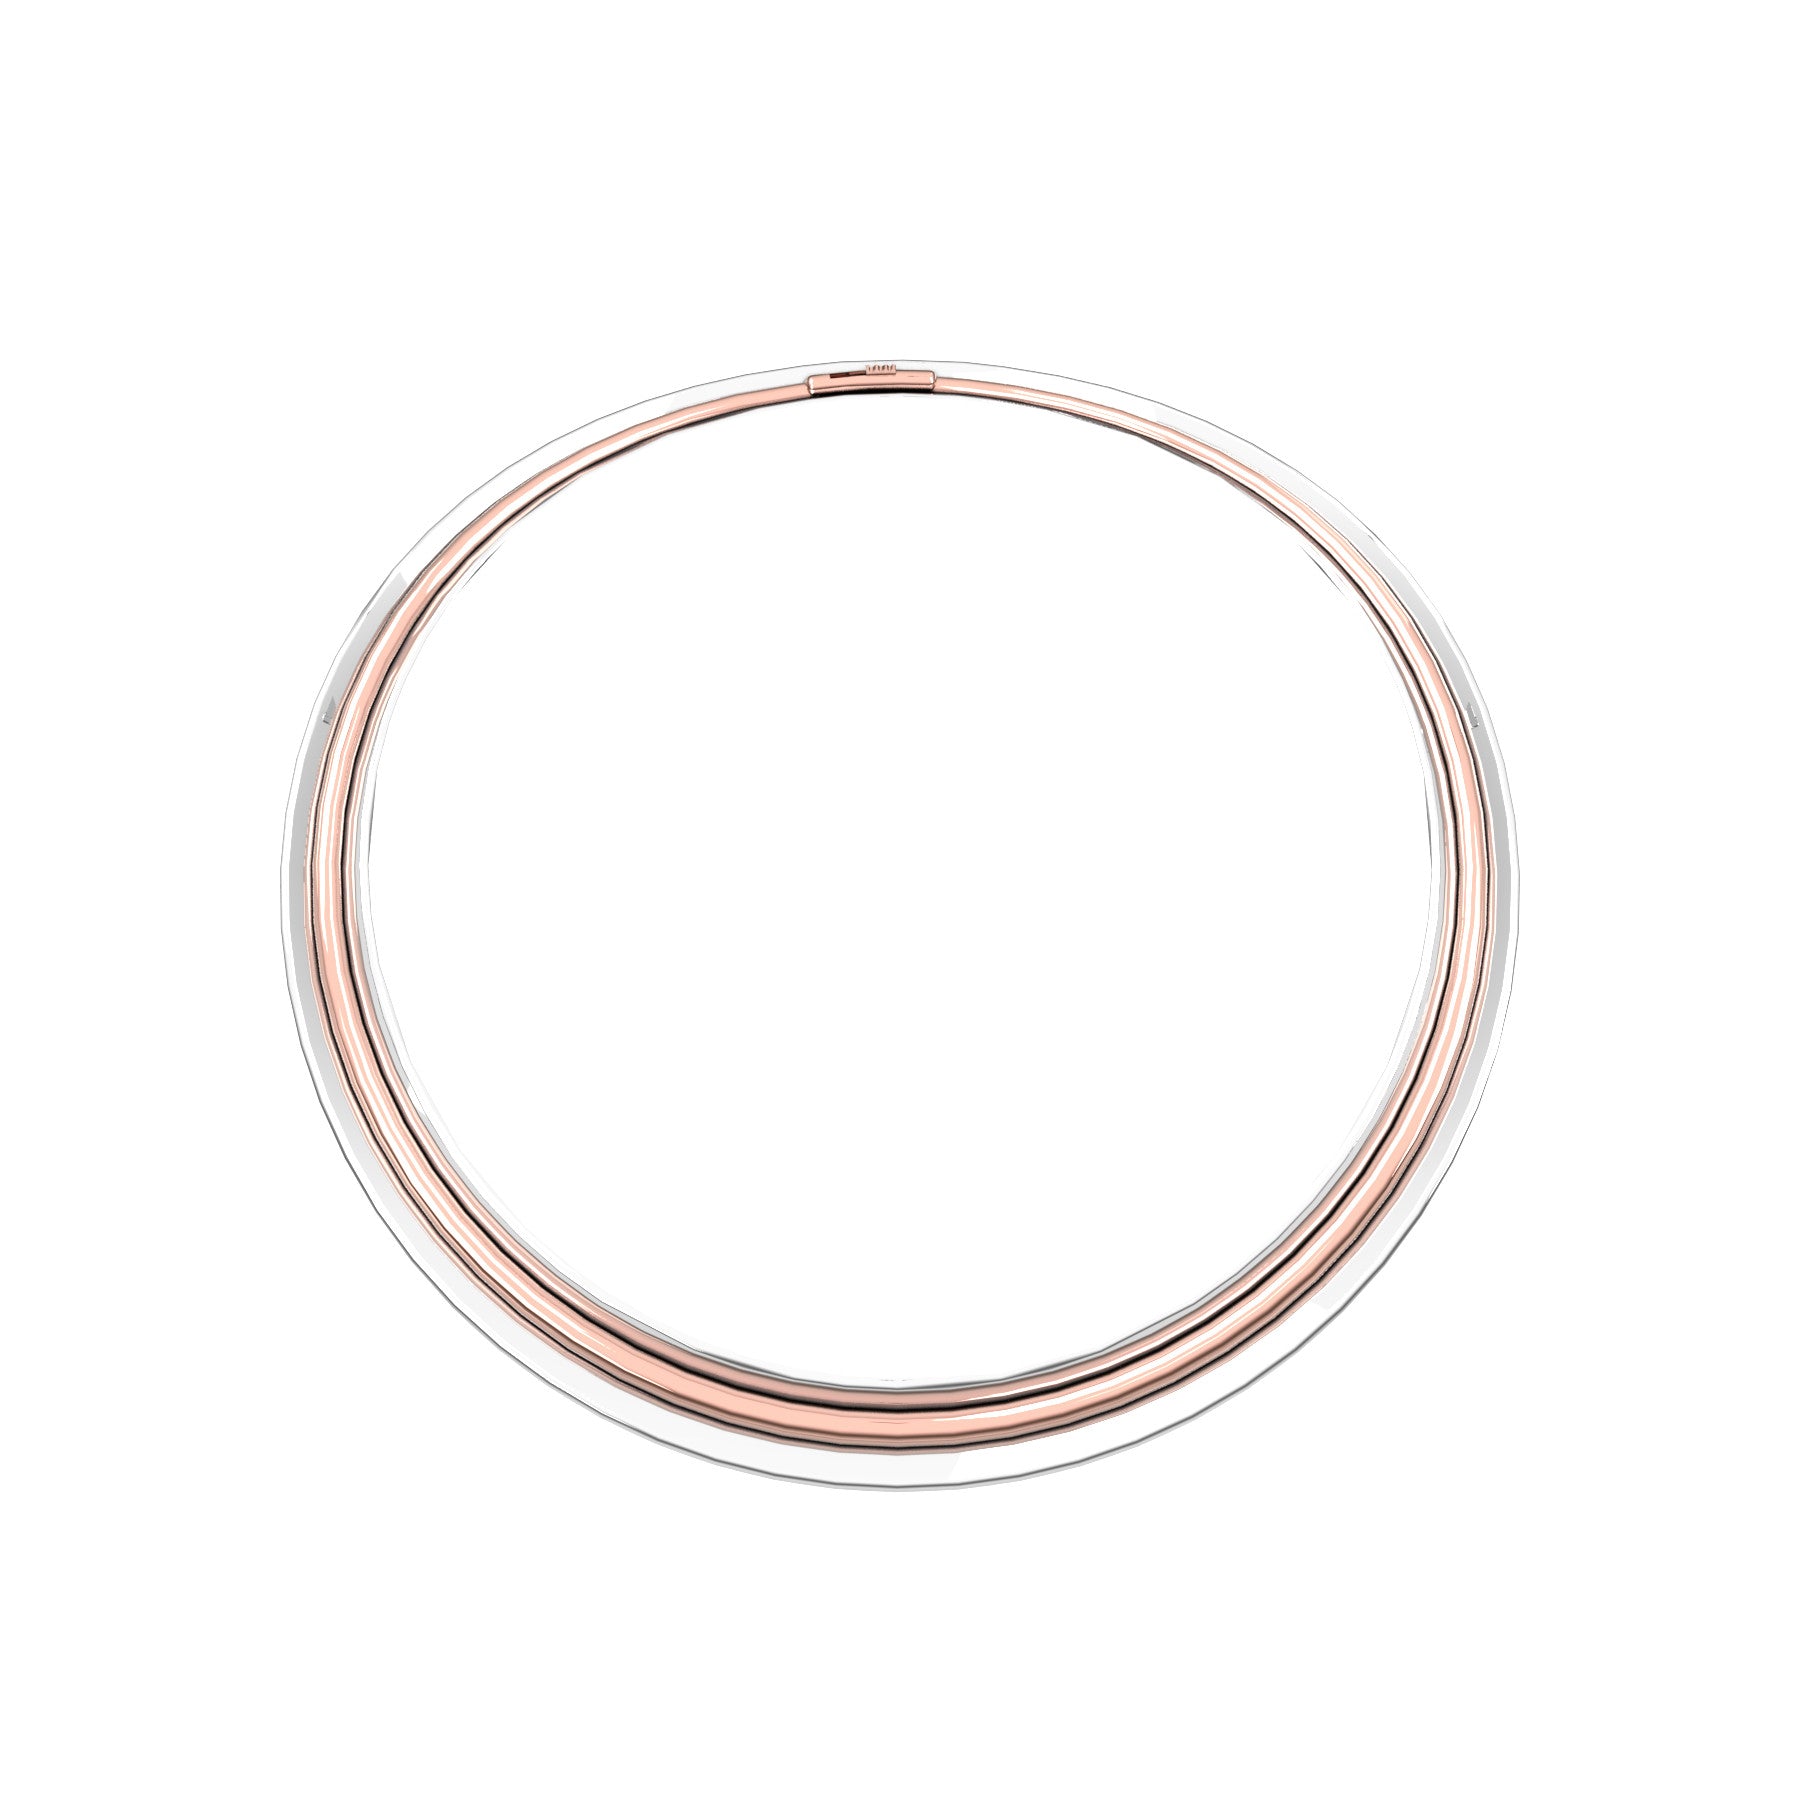 bobo rigid necklace, 18 K white and pink gold, weight about 90 to 98,5 g. (3.17 to 3.47 oz) width 13,7 mm max